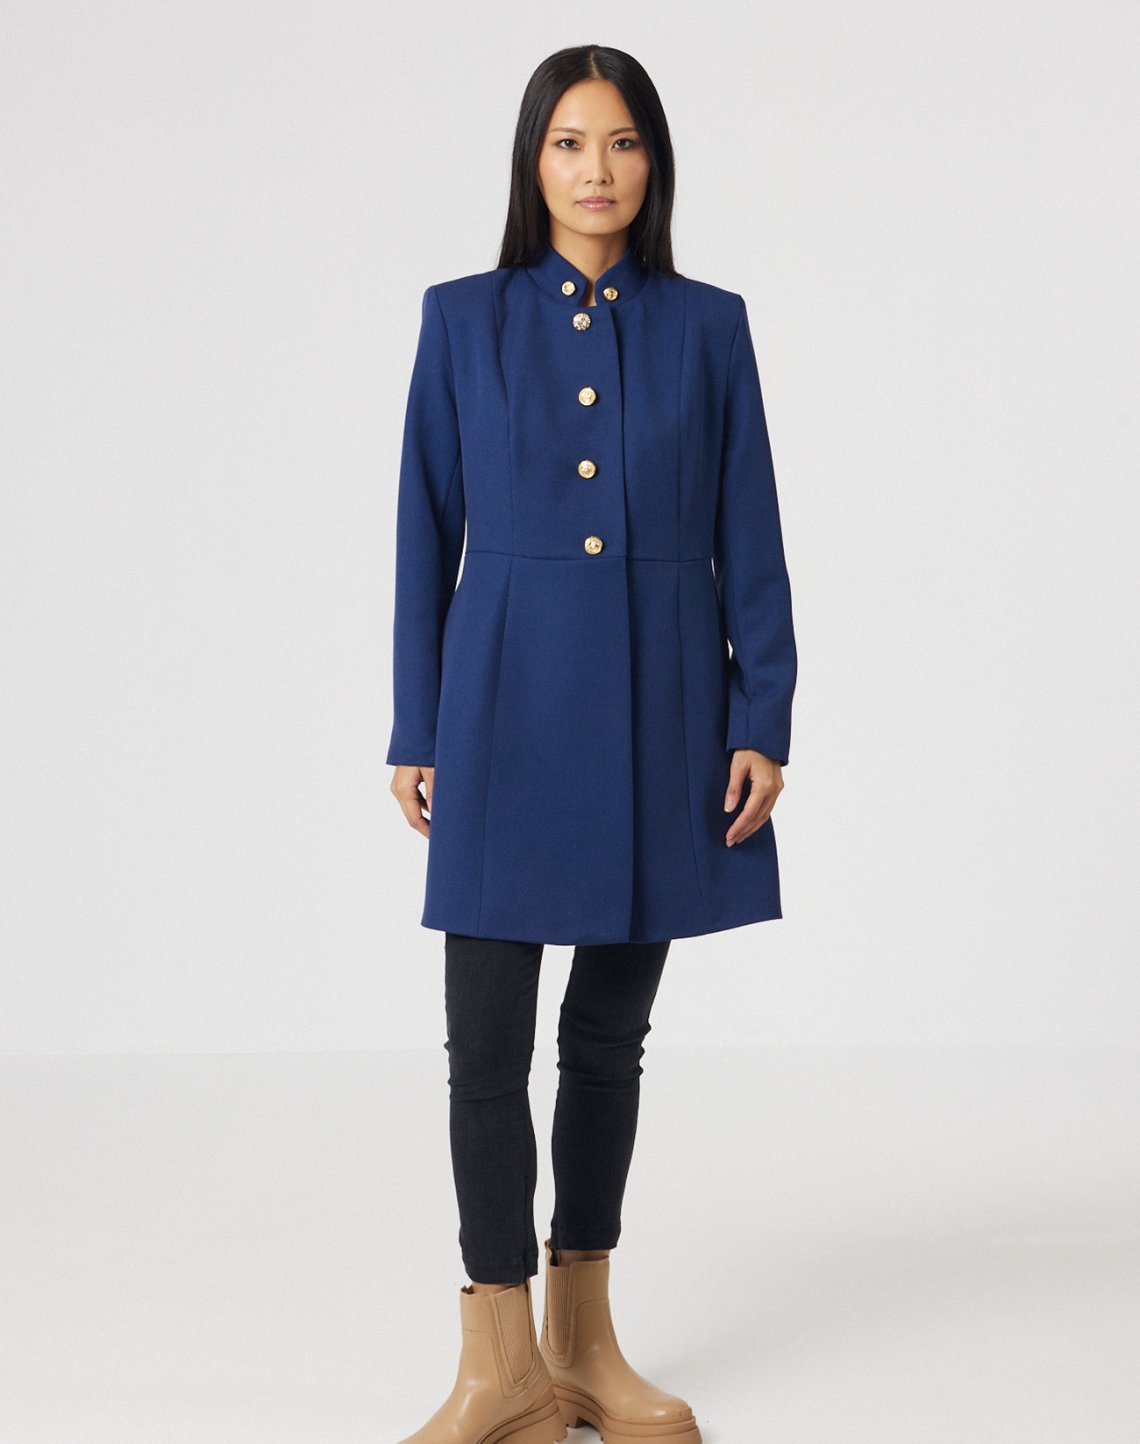 Coat with jewel buttons